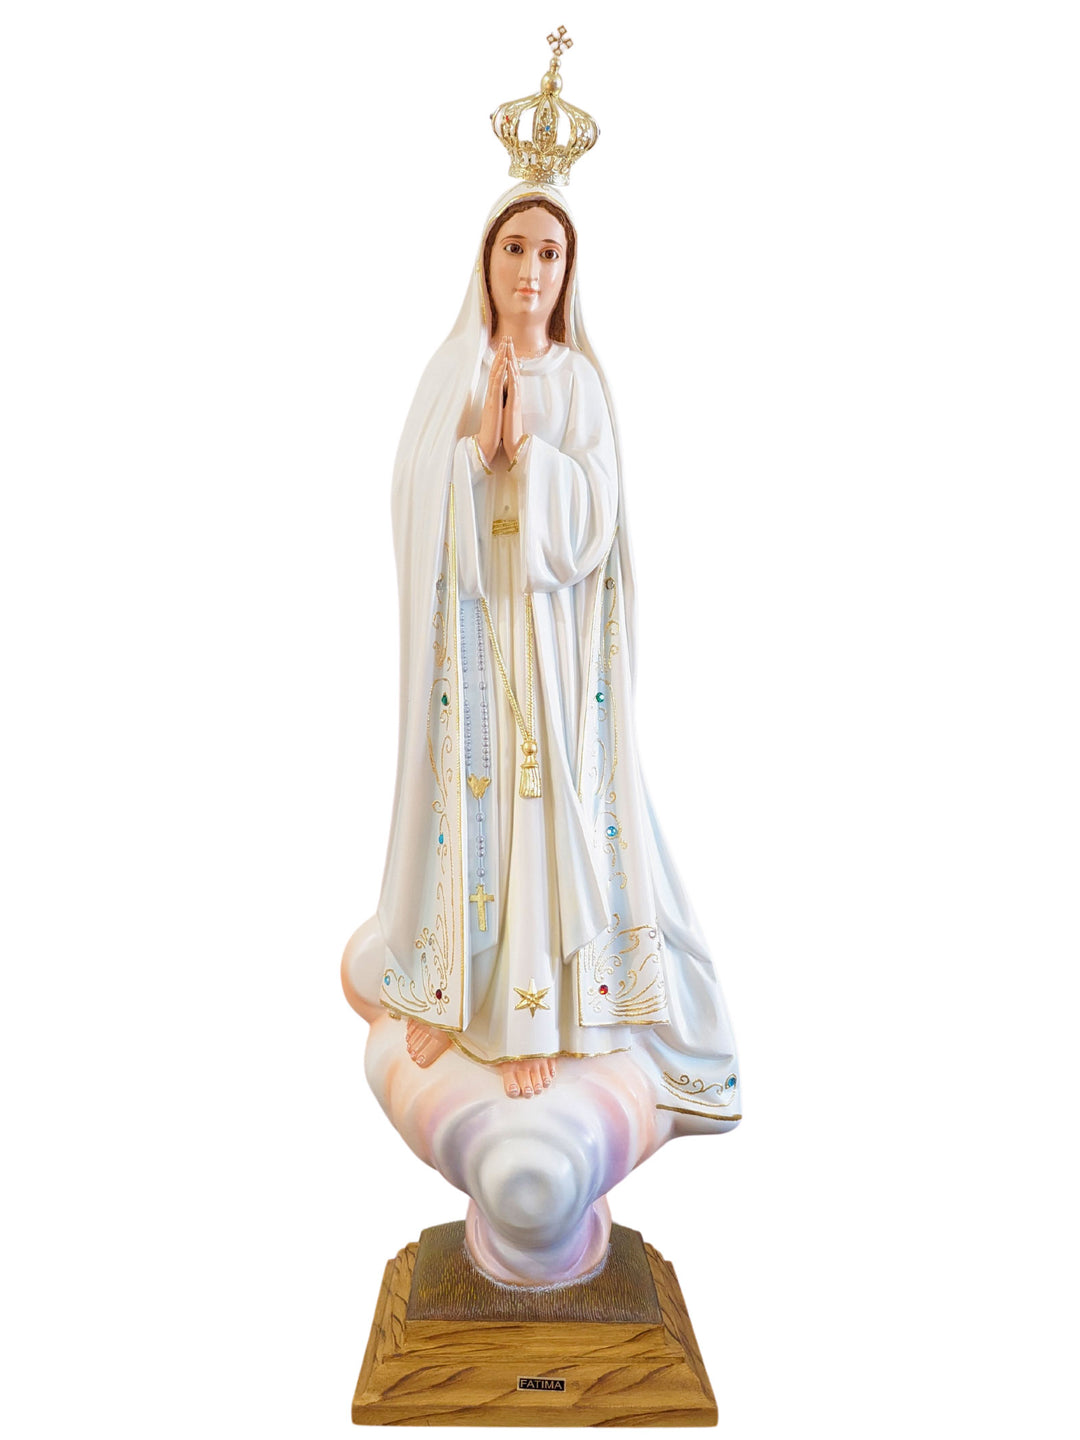 31 Inch Glass Eyes Our Lady of Fatima Statue Made in Portugal